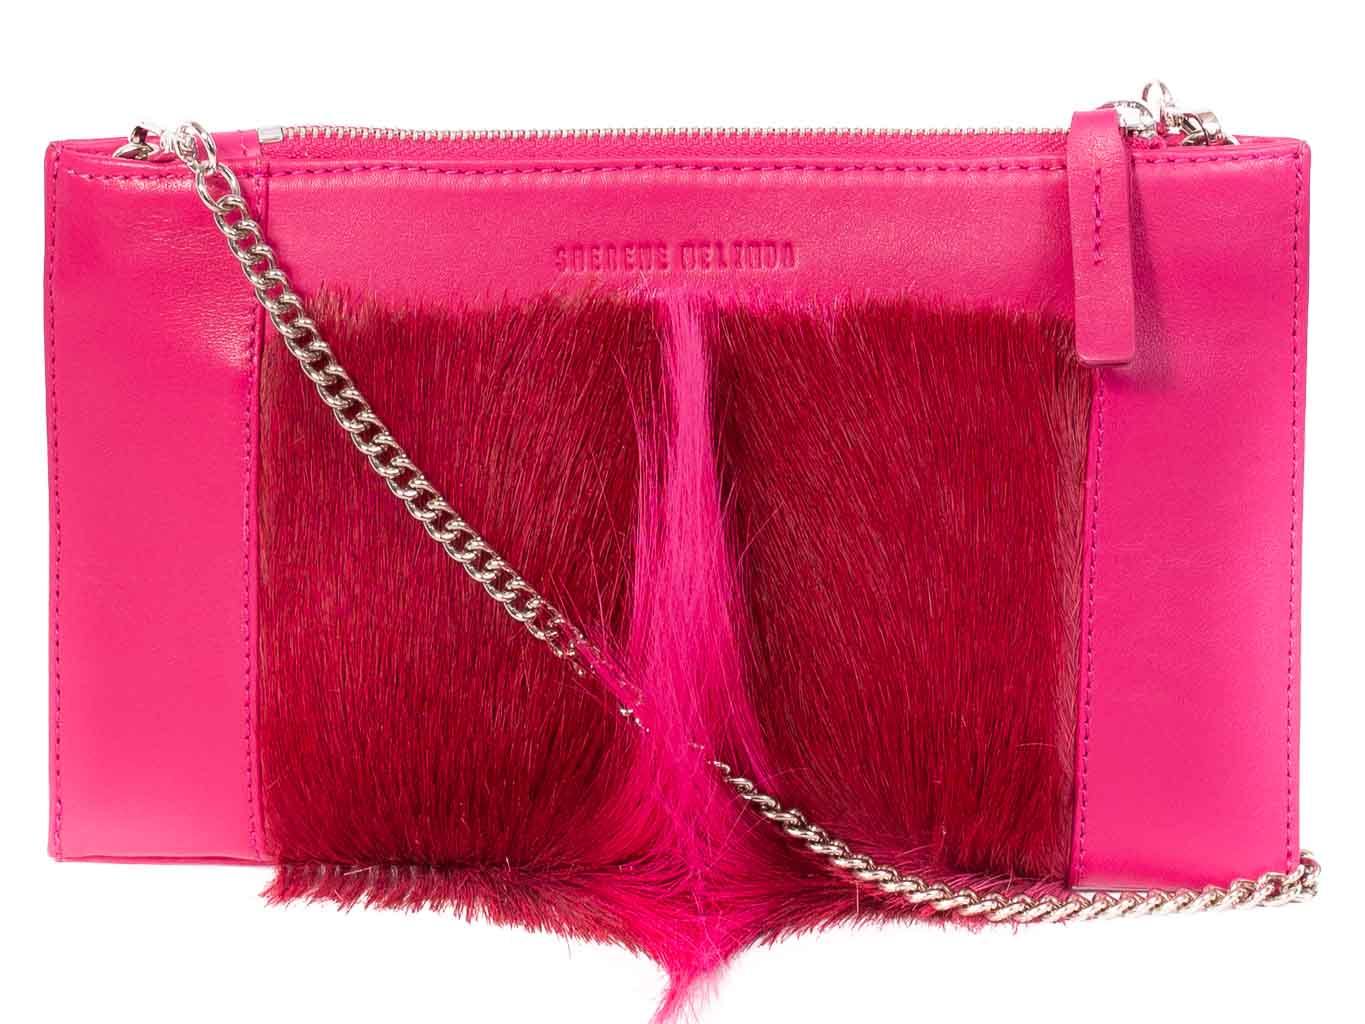 Clutch Springbok Handbag in Fuchsia with a fan feature by Sherene Melinda front strap